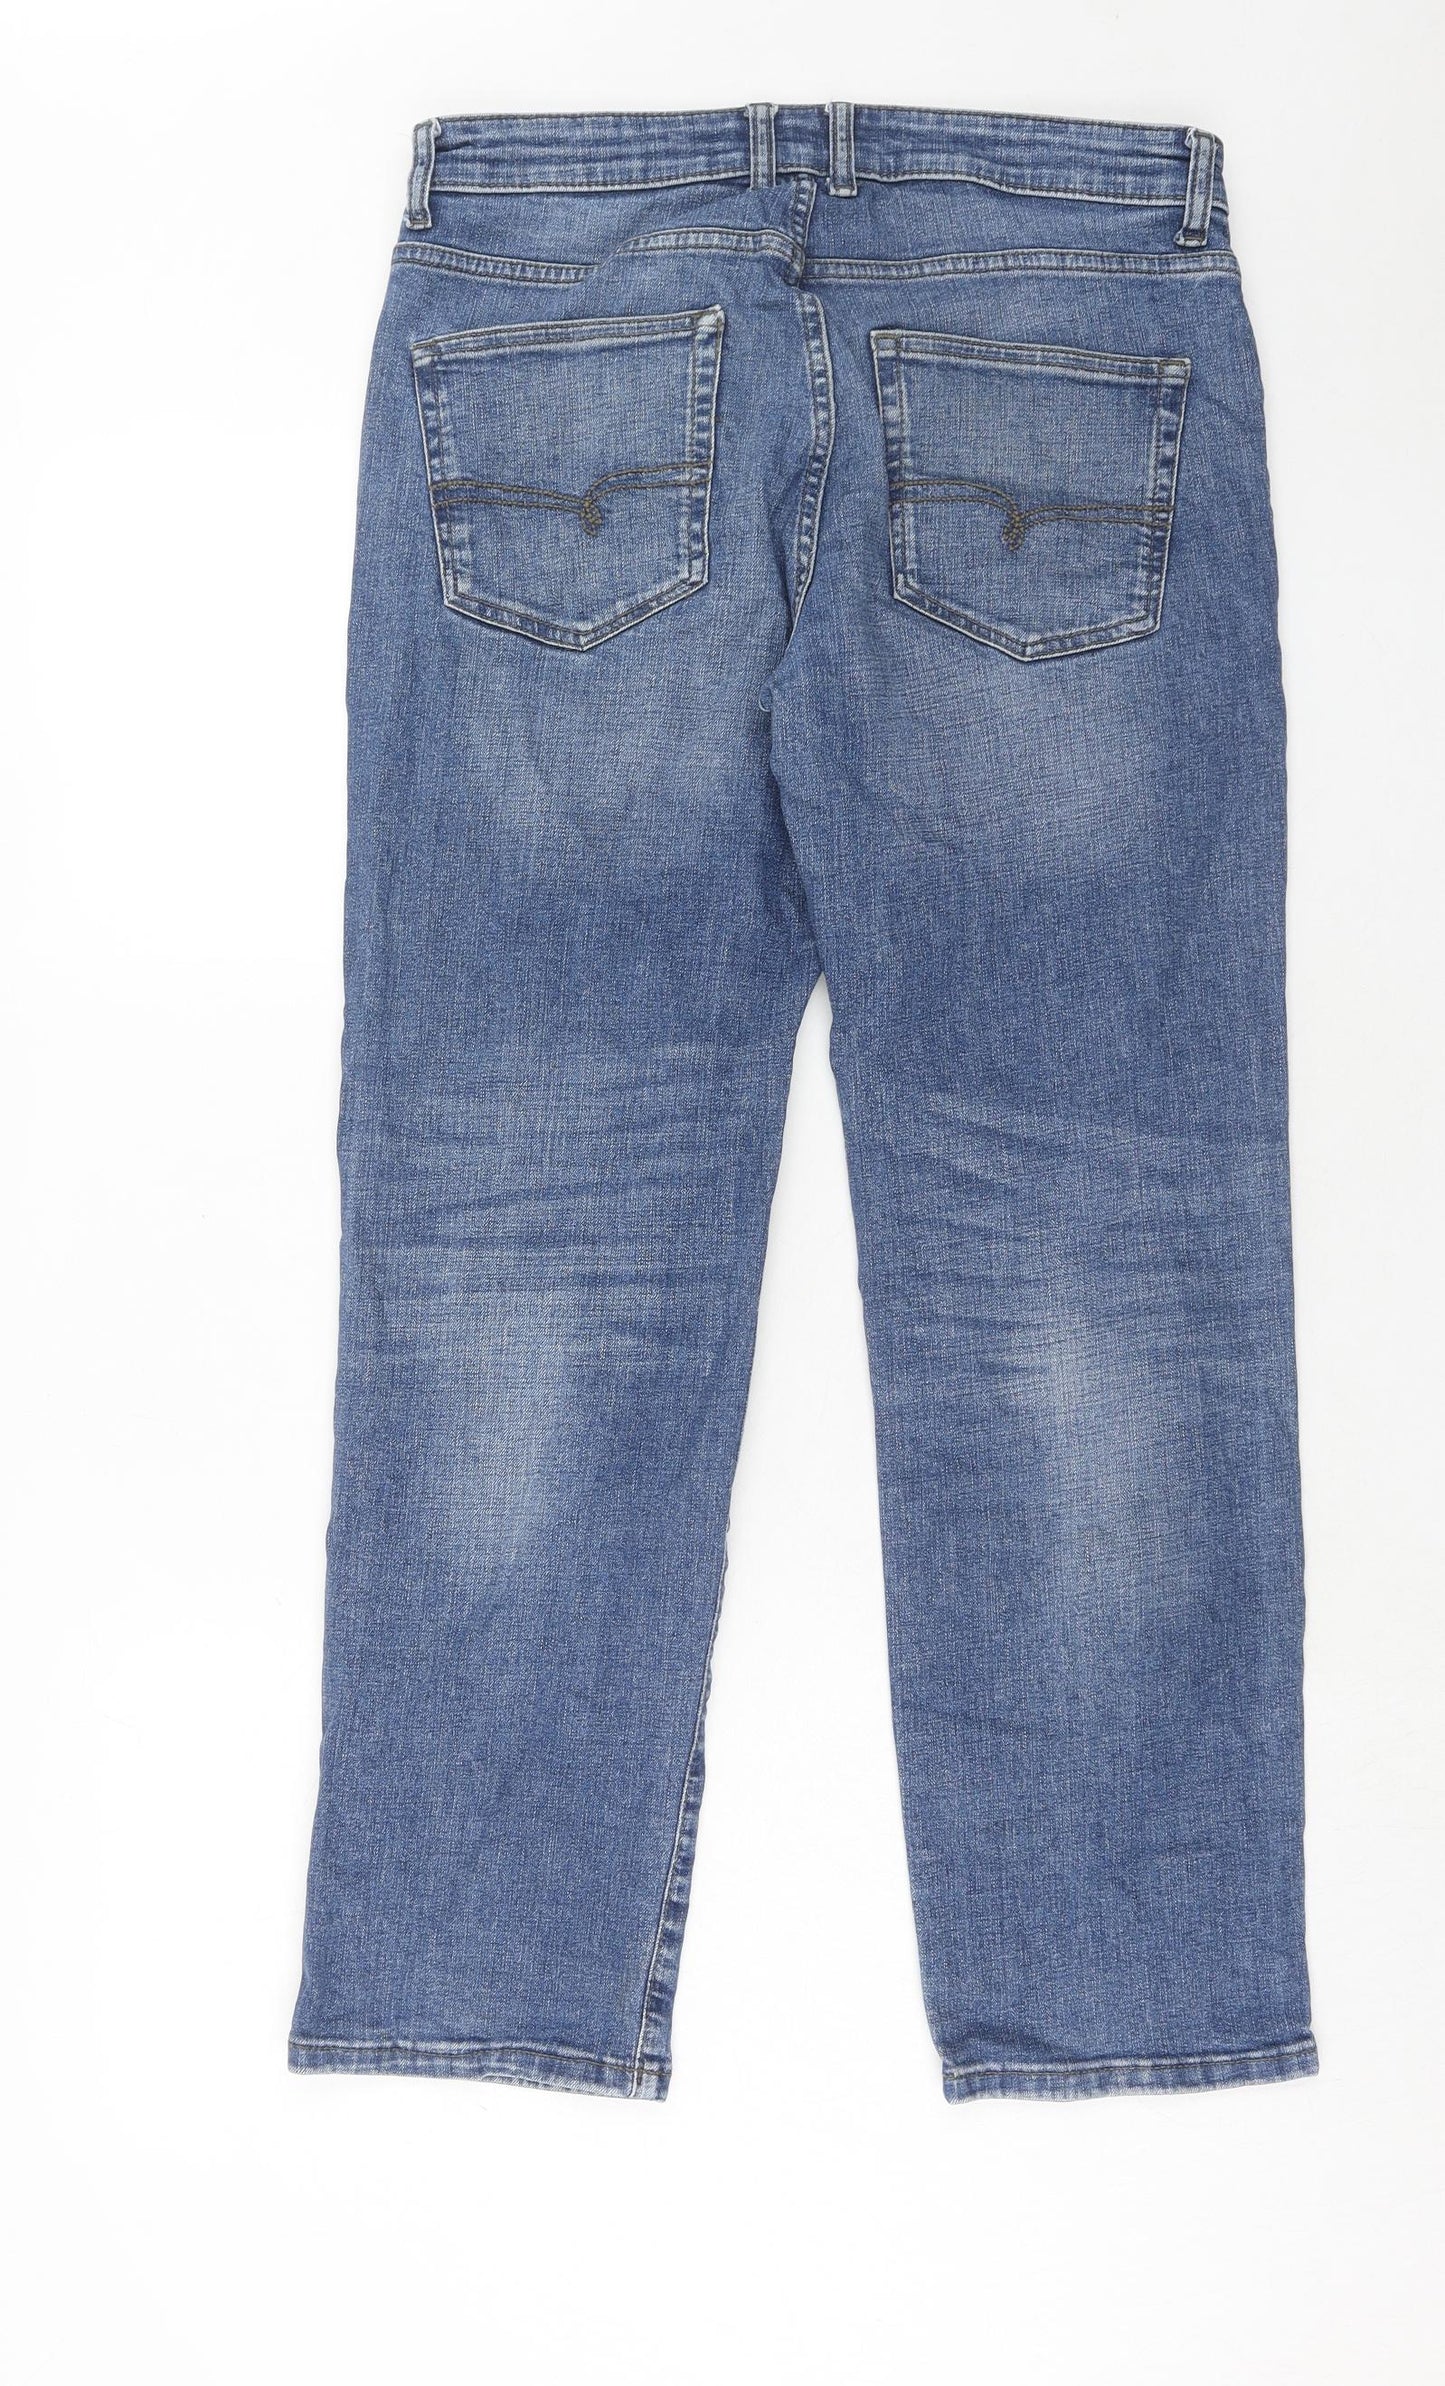 NEXT Mens Blue Cotton Straight Jeans Size 30 in L29 in Regular Zip